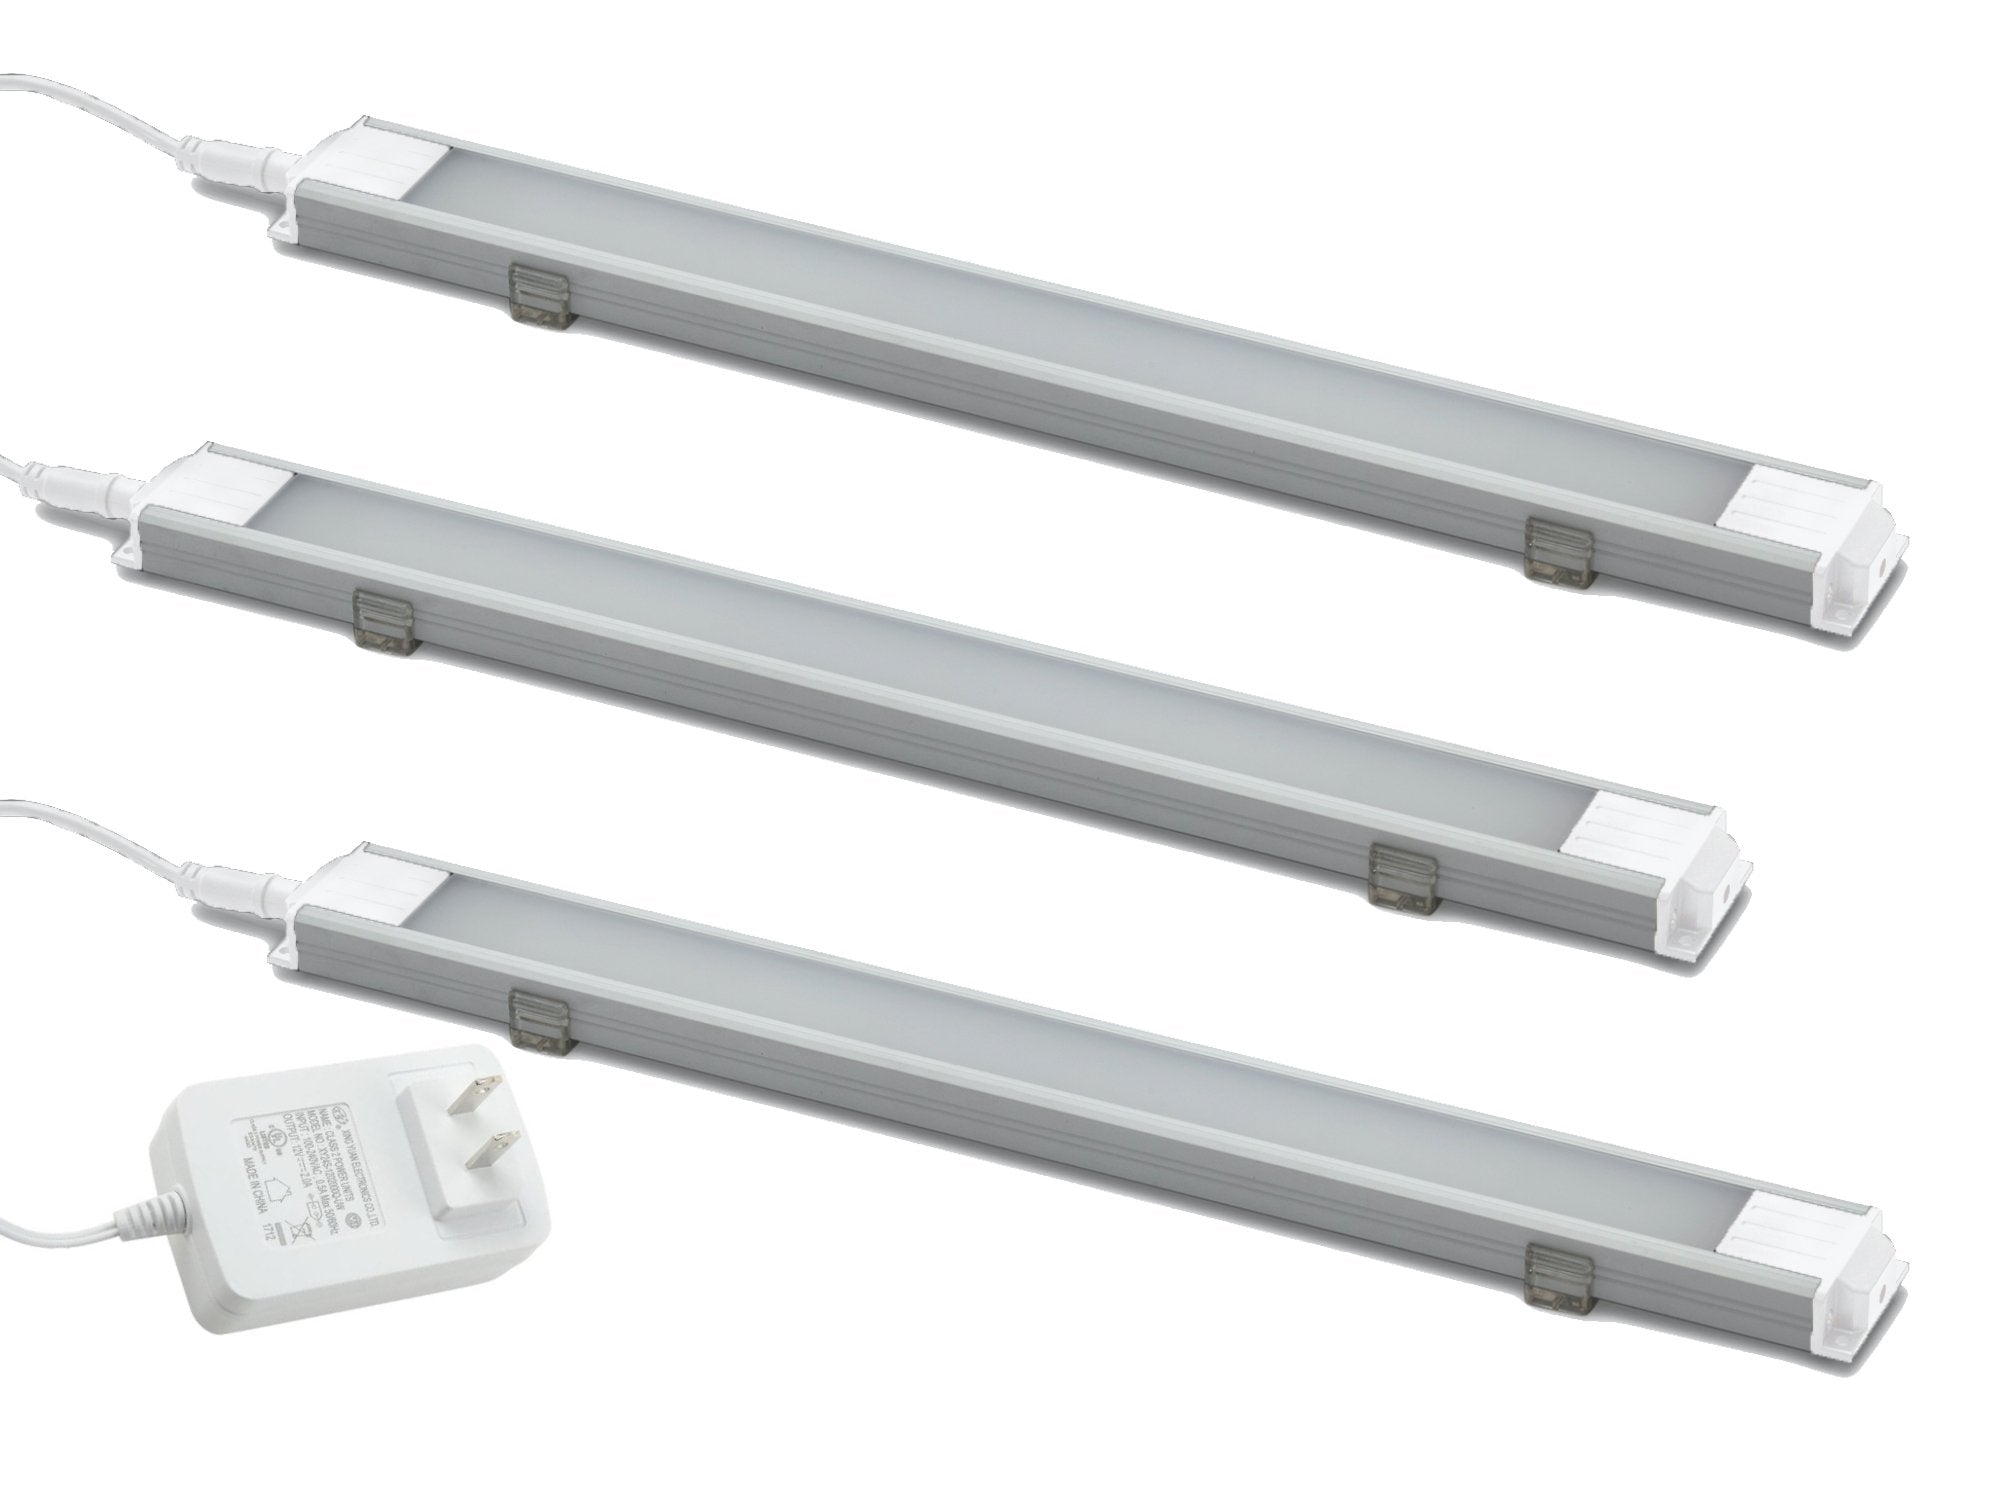 LED Display Lights (2 x Light Adapters, 1 x Light Extensions)